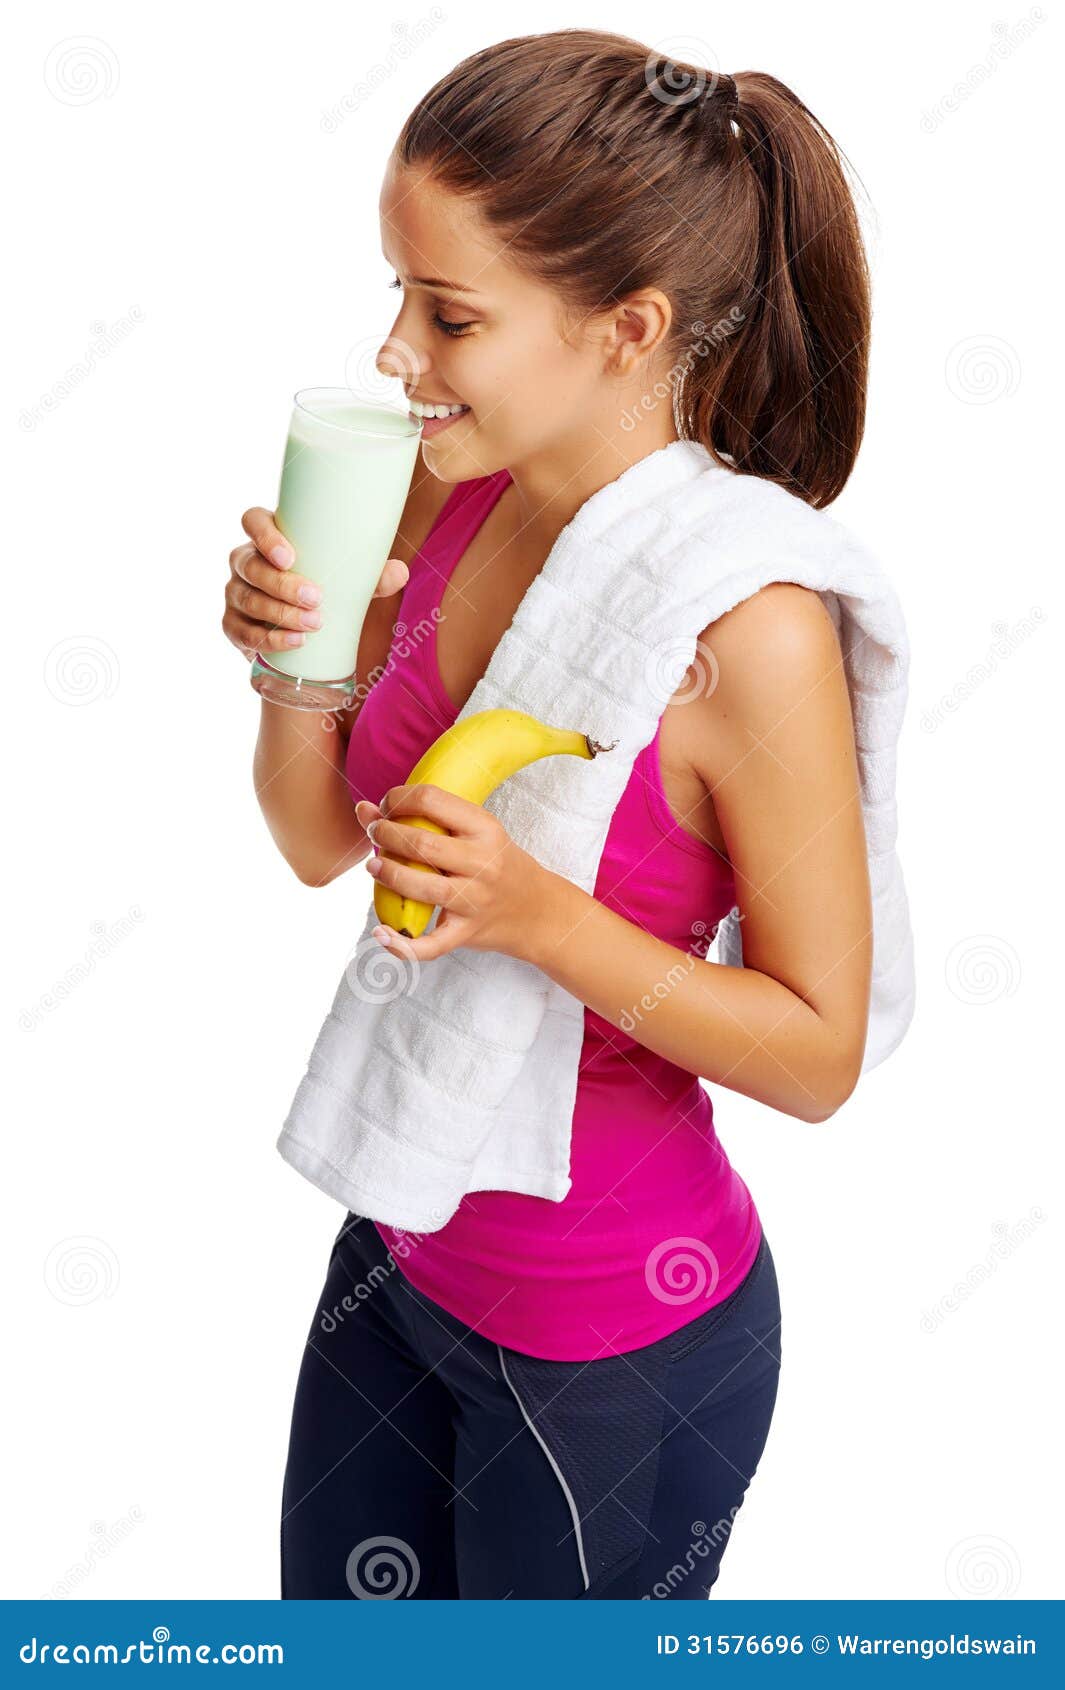 Woman with healthy diet protein shake drinking for sport and fitness.